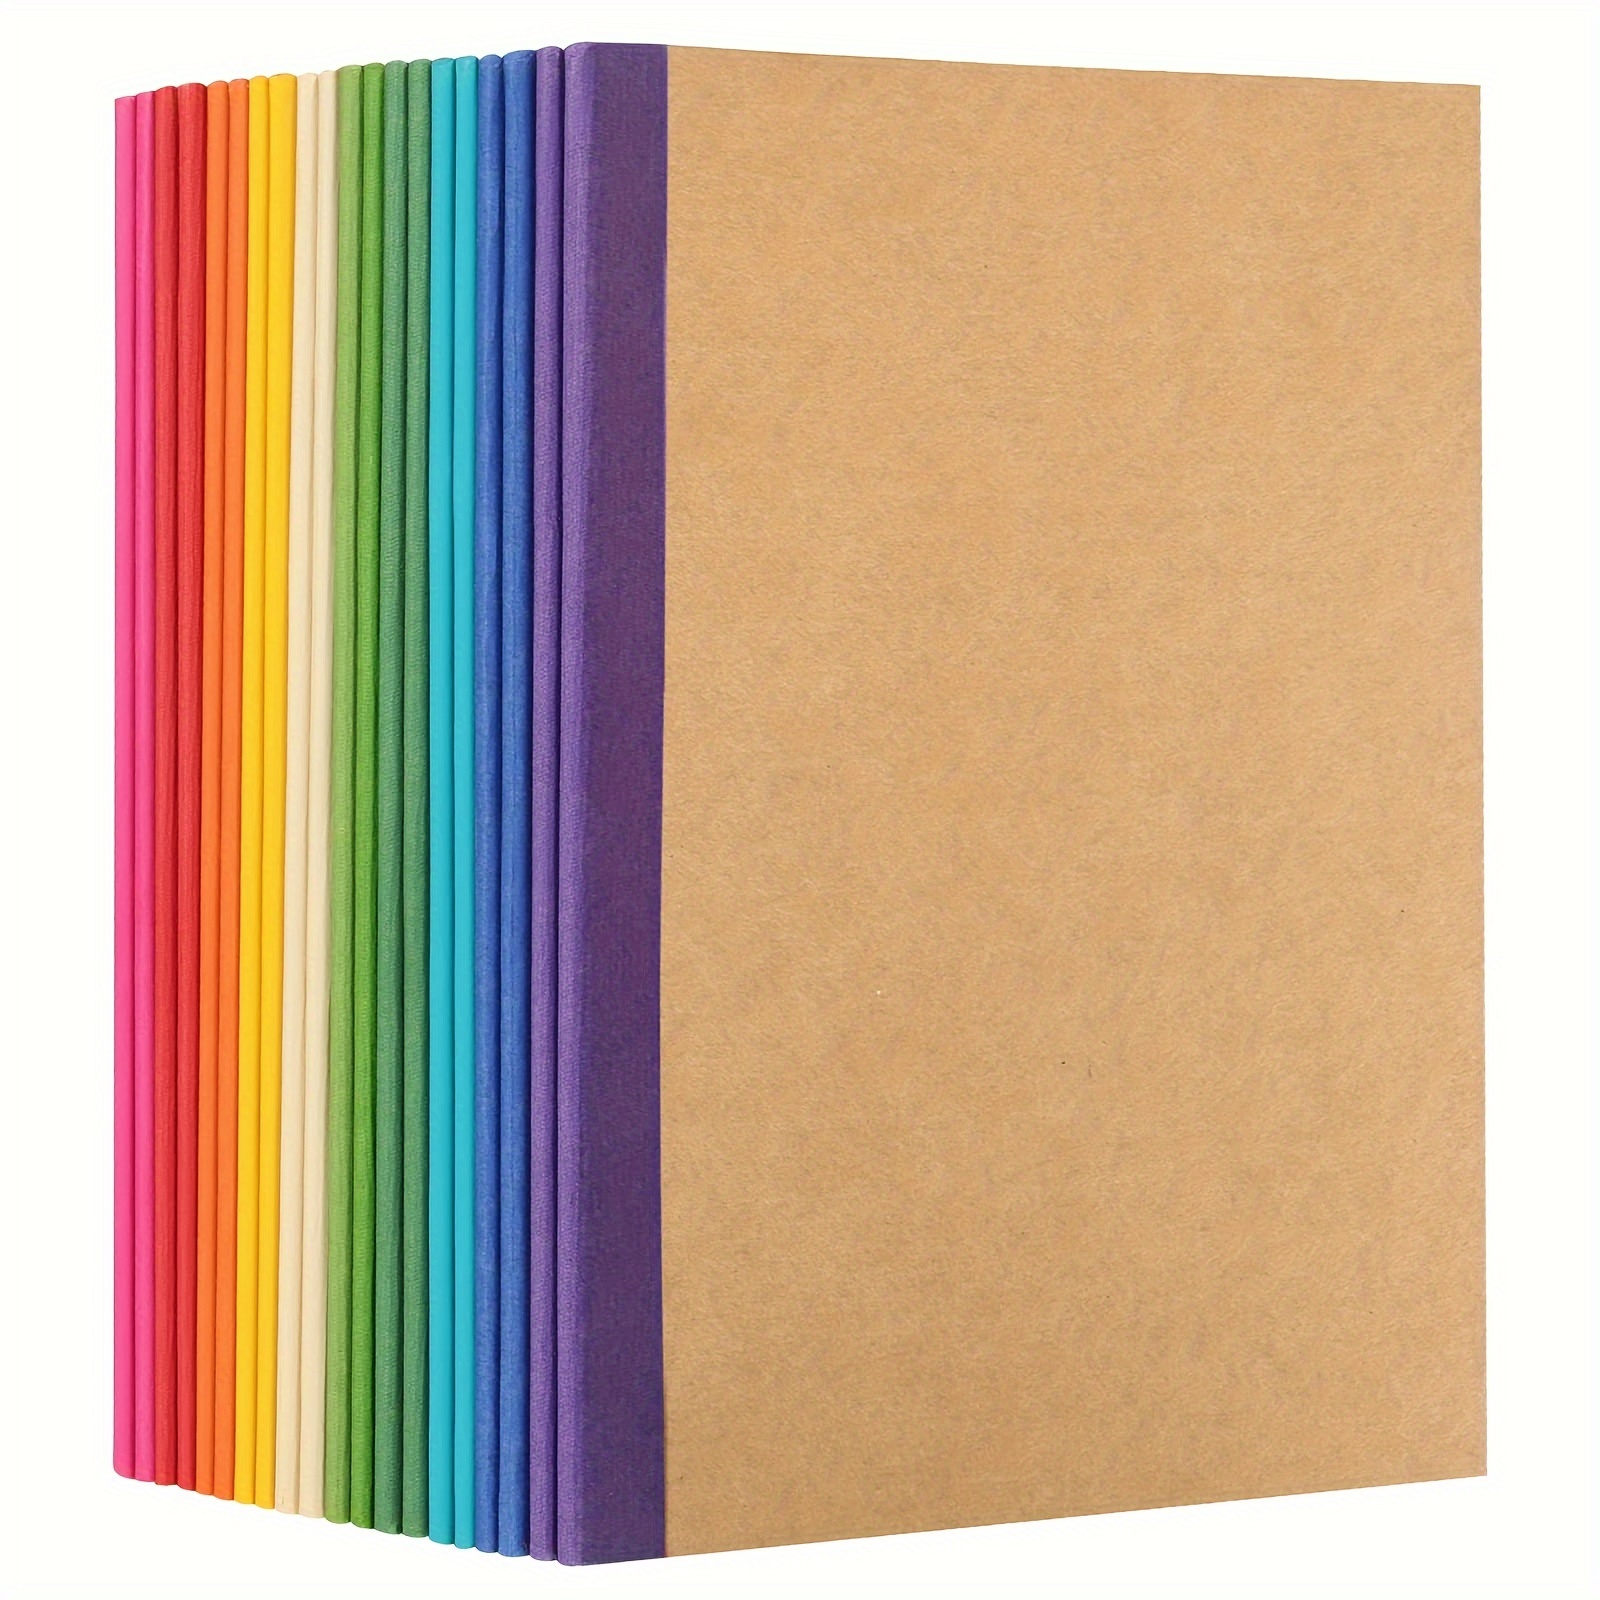 

20 Pack A5 Kraft Notebooks, Lined Journal Bulk With Rainbow Spine, 10 Colors, 60 Pages Soft Cover Composition Notebooks, Journals For Writing, For Home, Travel, Office Supplies, 5.5 X 8.3 Inches